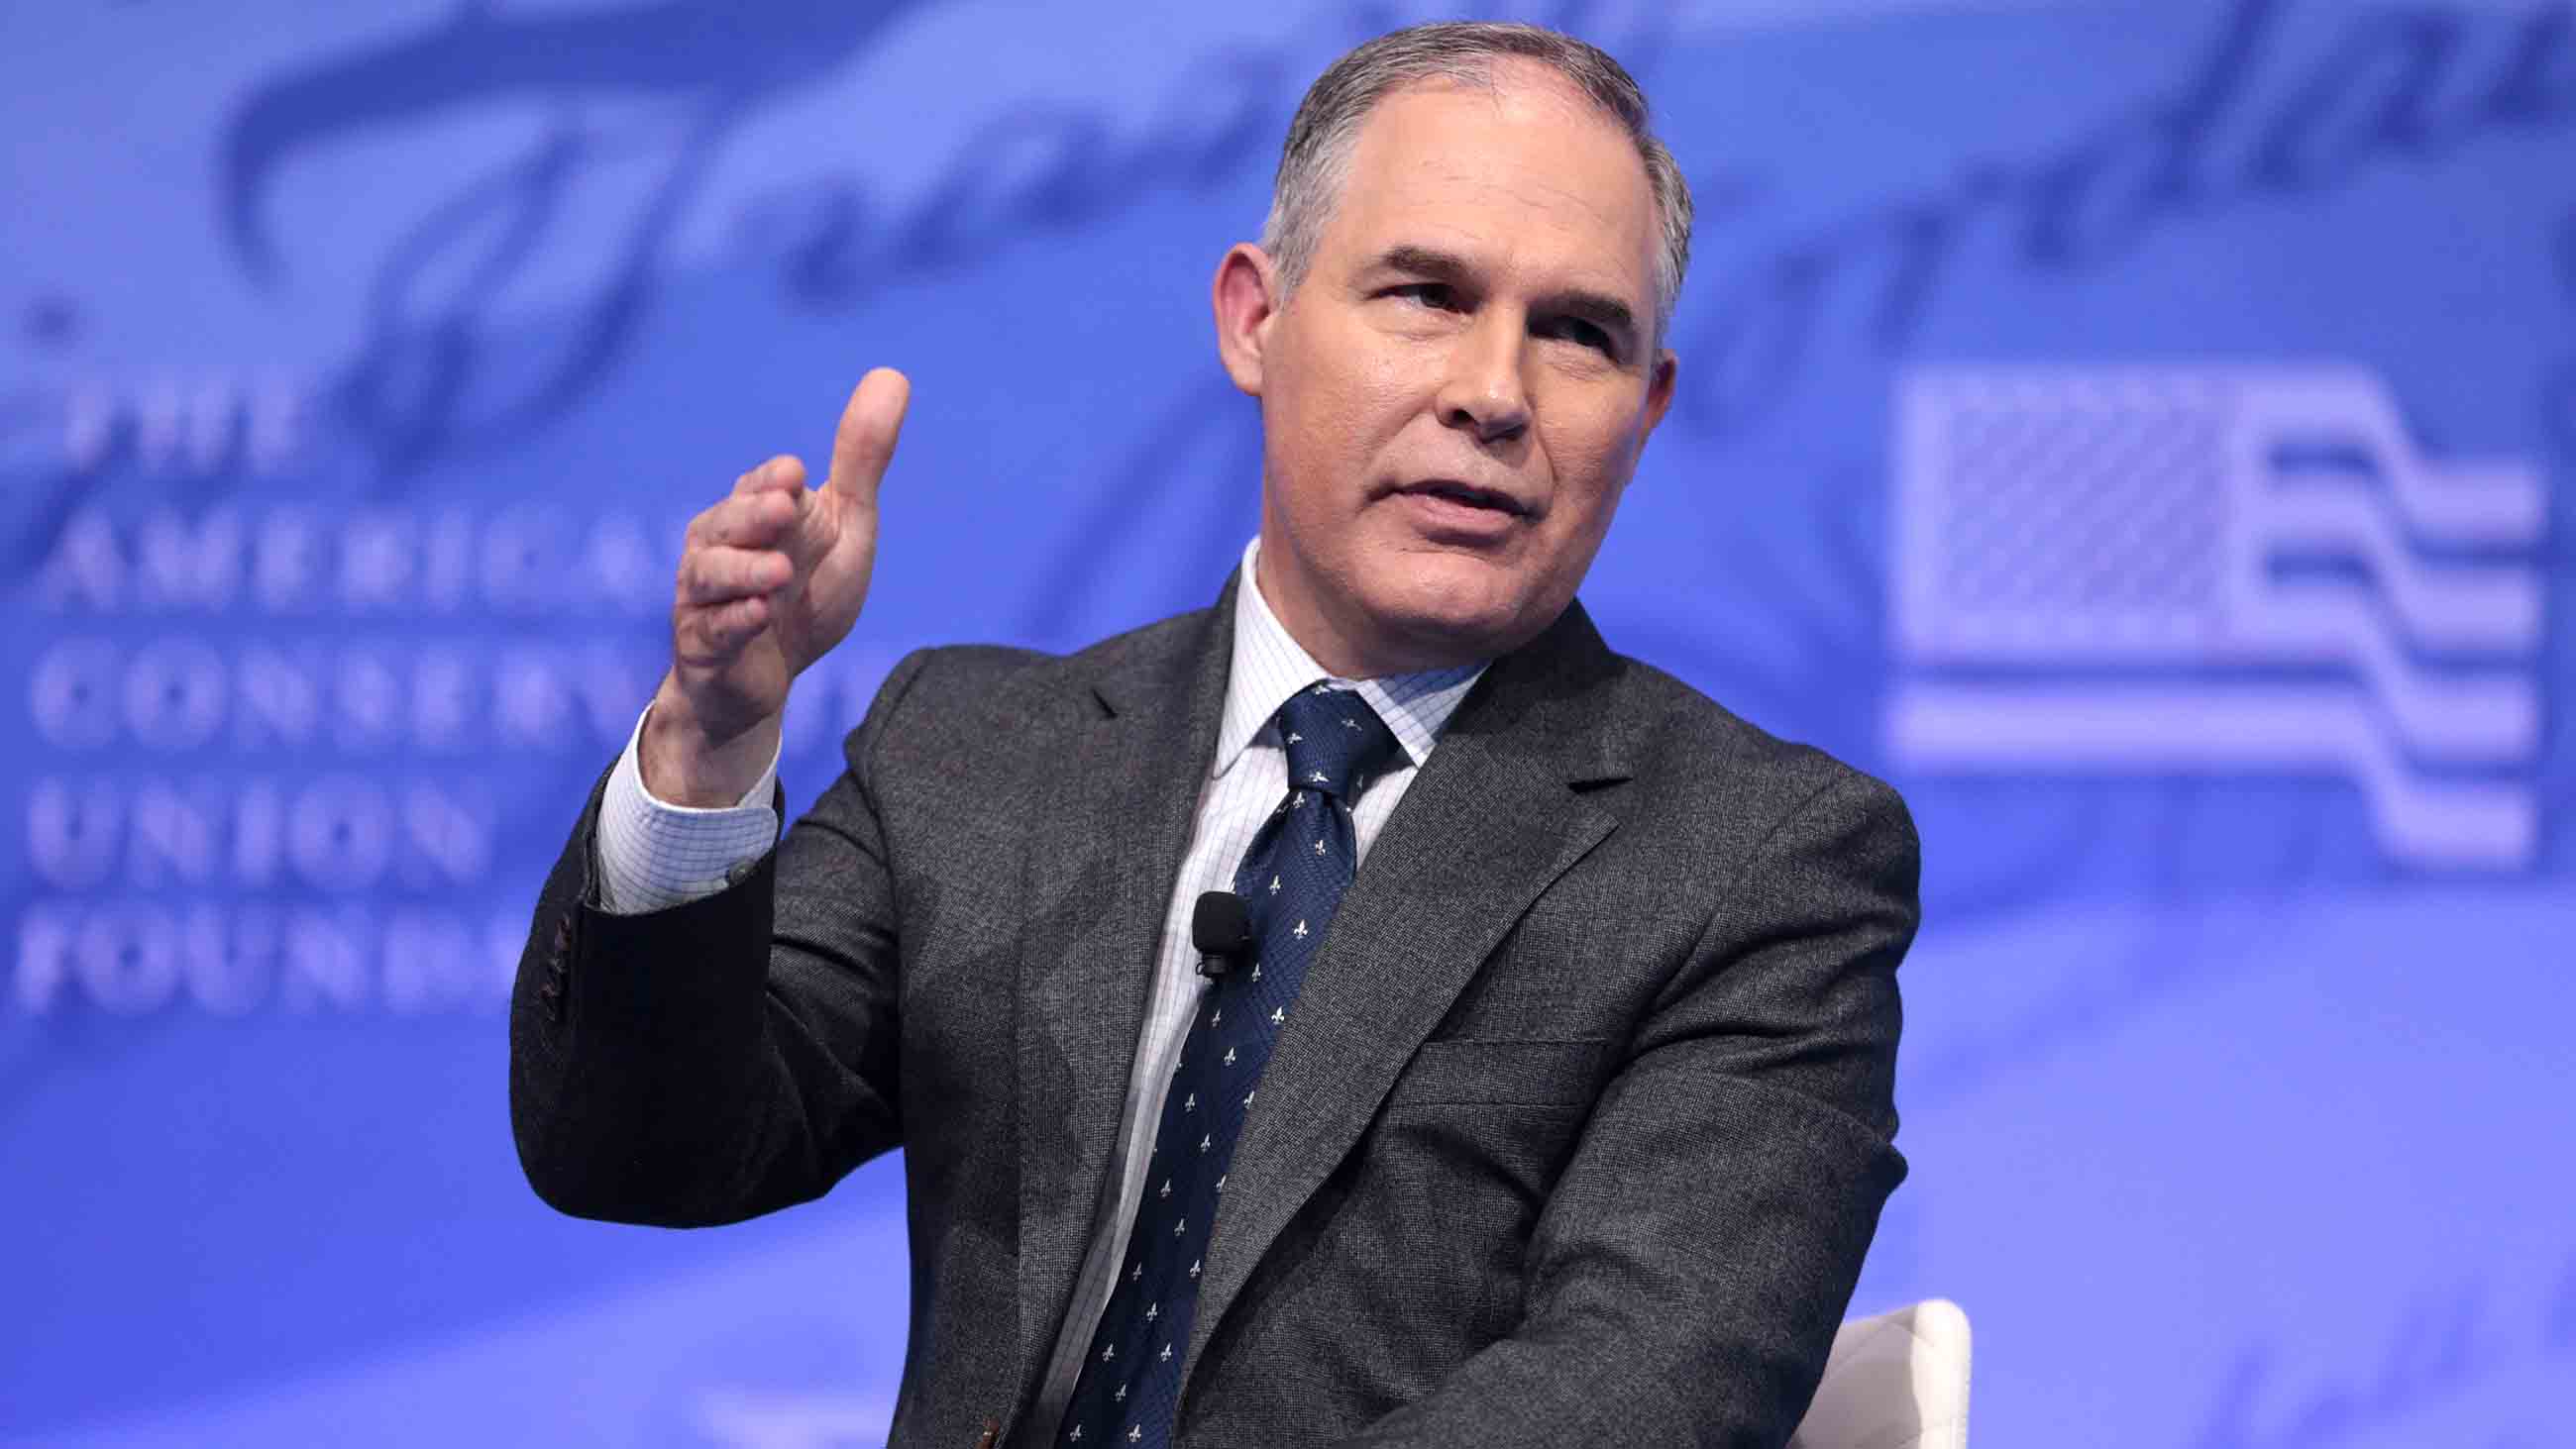 EPA administrator Scott Pruitt continues to come under fire for his ties to industry.